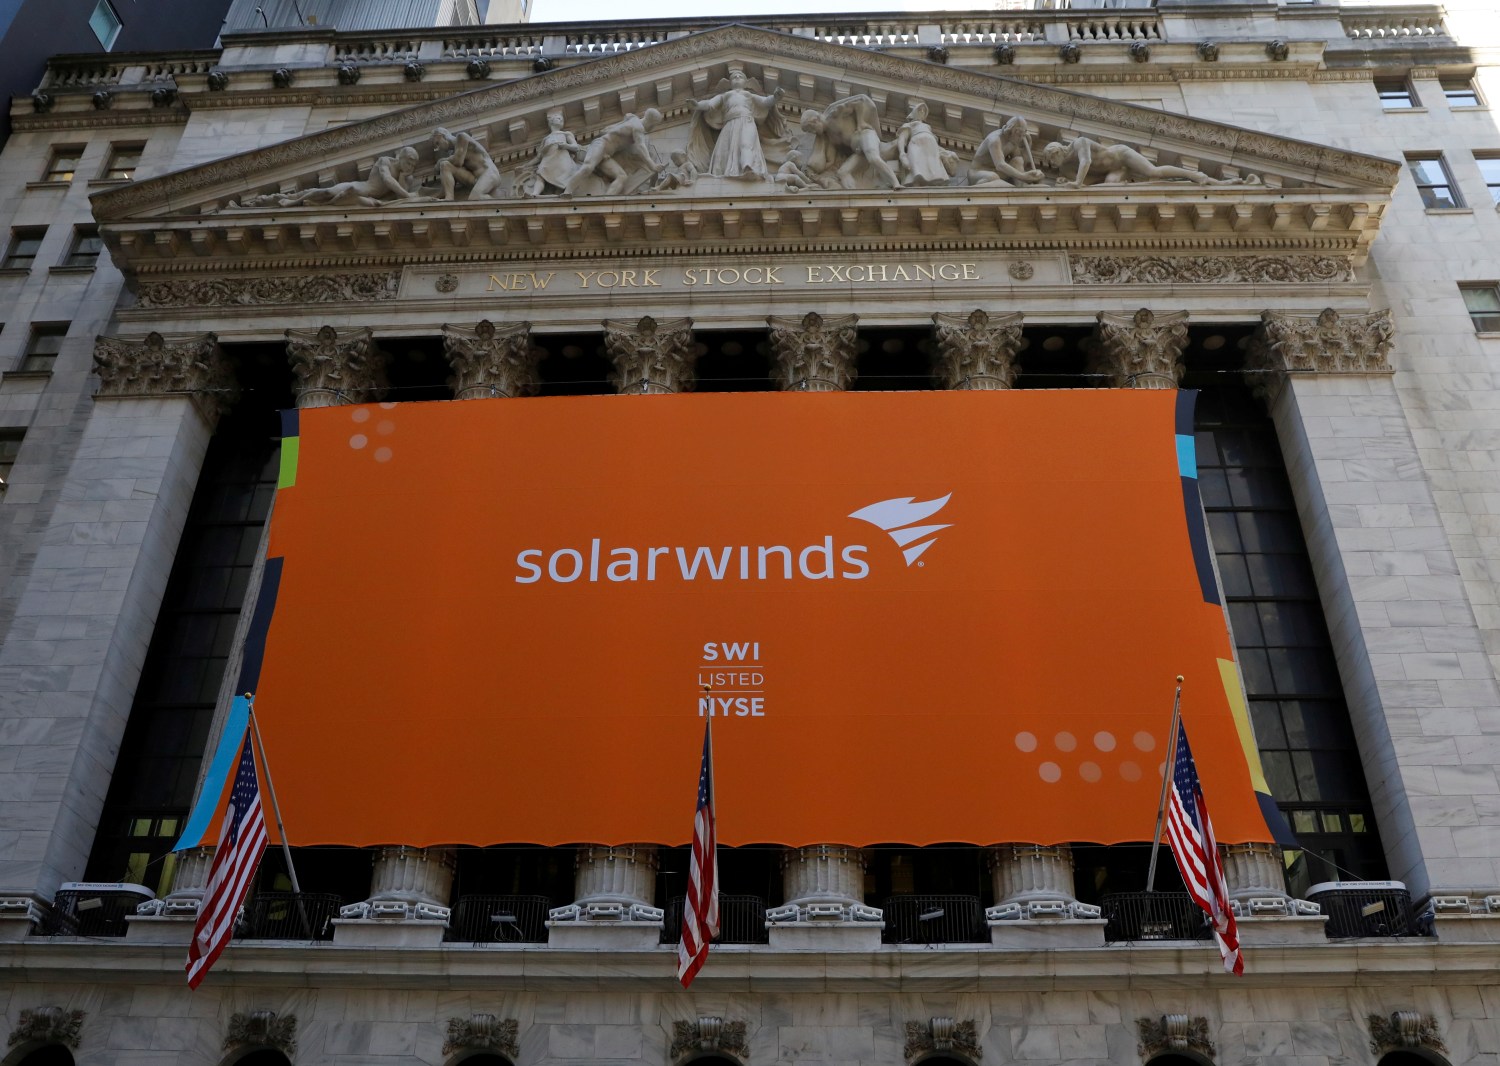 SolarWinds' banner hangs at the New York Stock Exchange